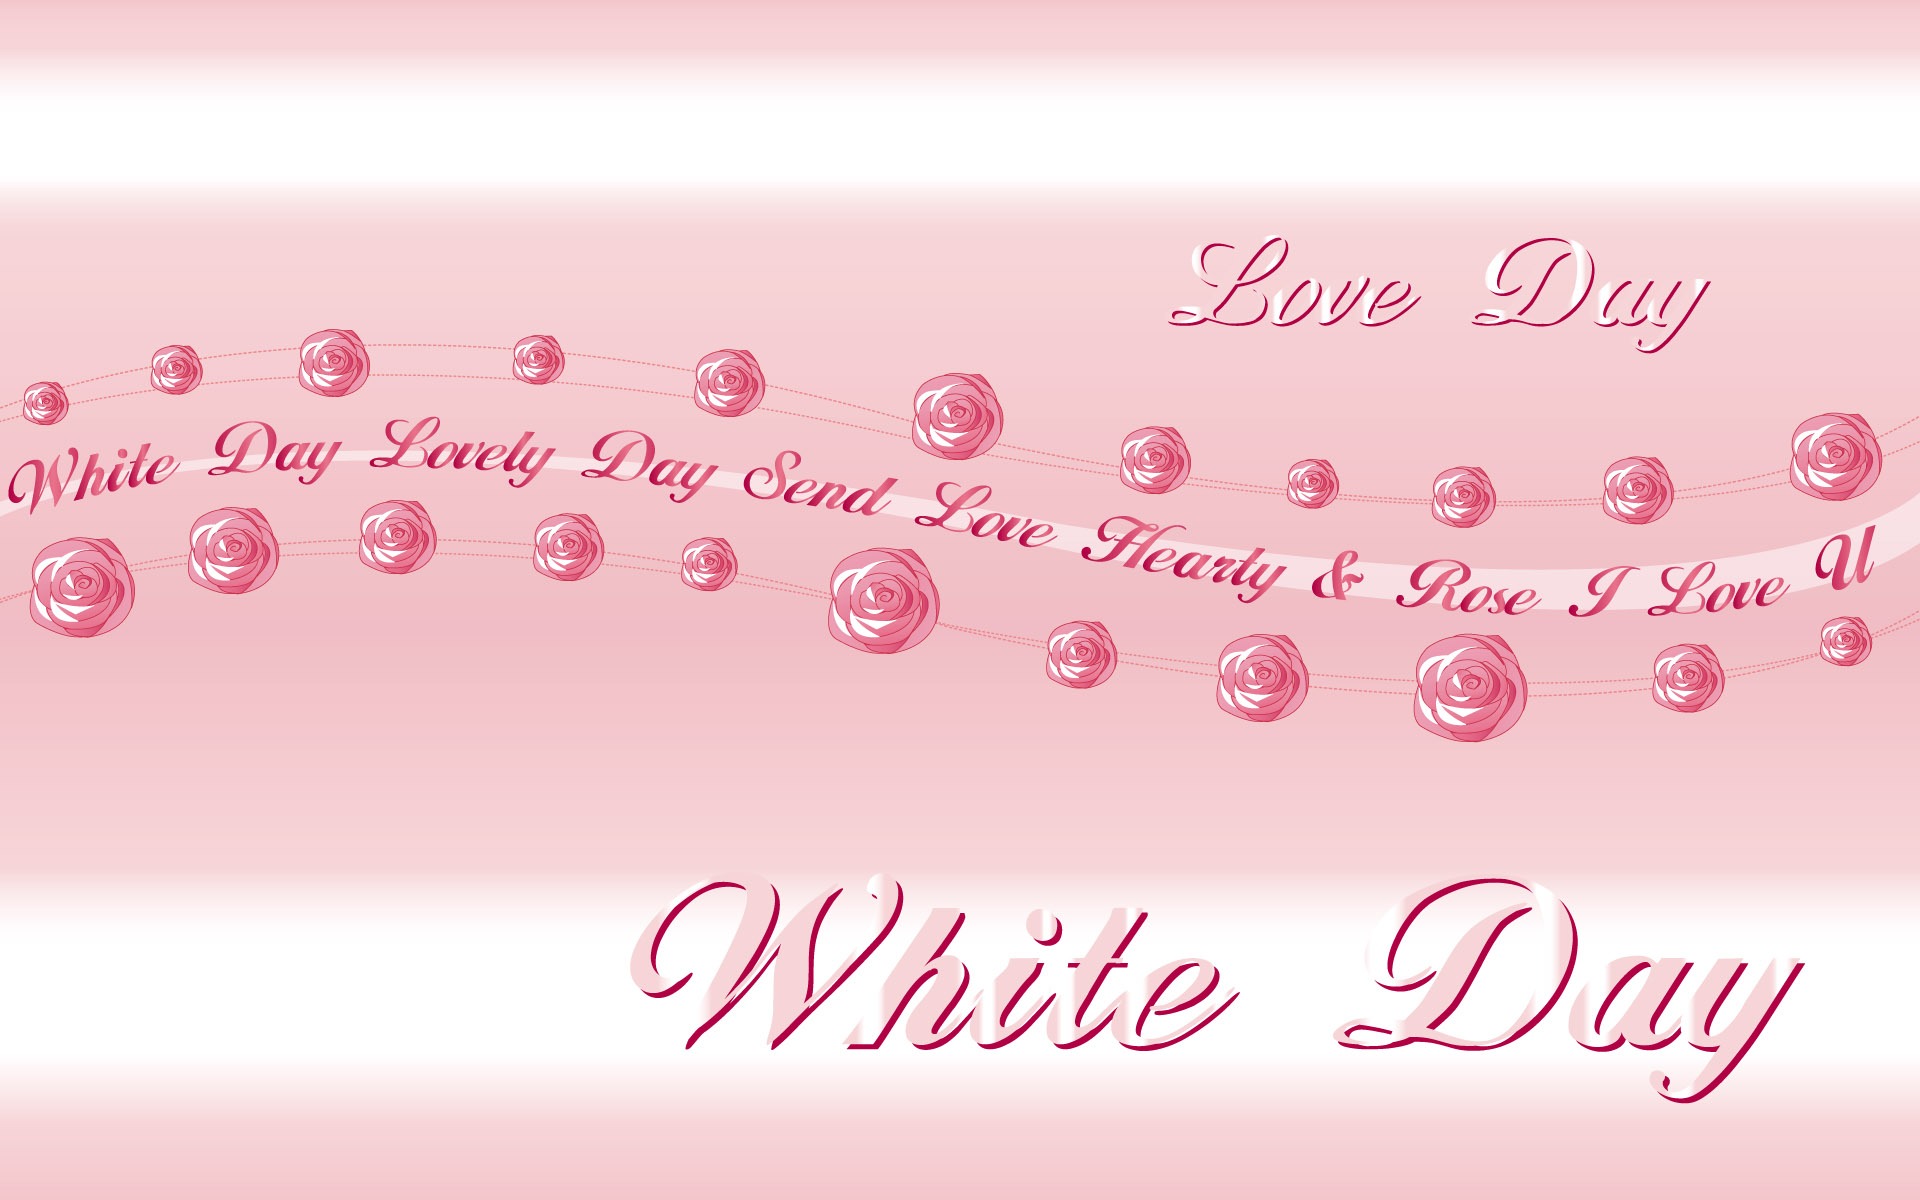 Valentine's Day Theme Wallpapers (2) #10 - 1920x1200